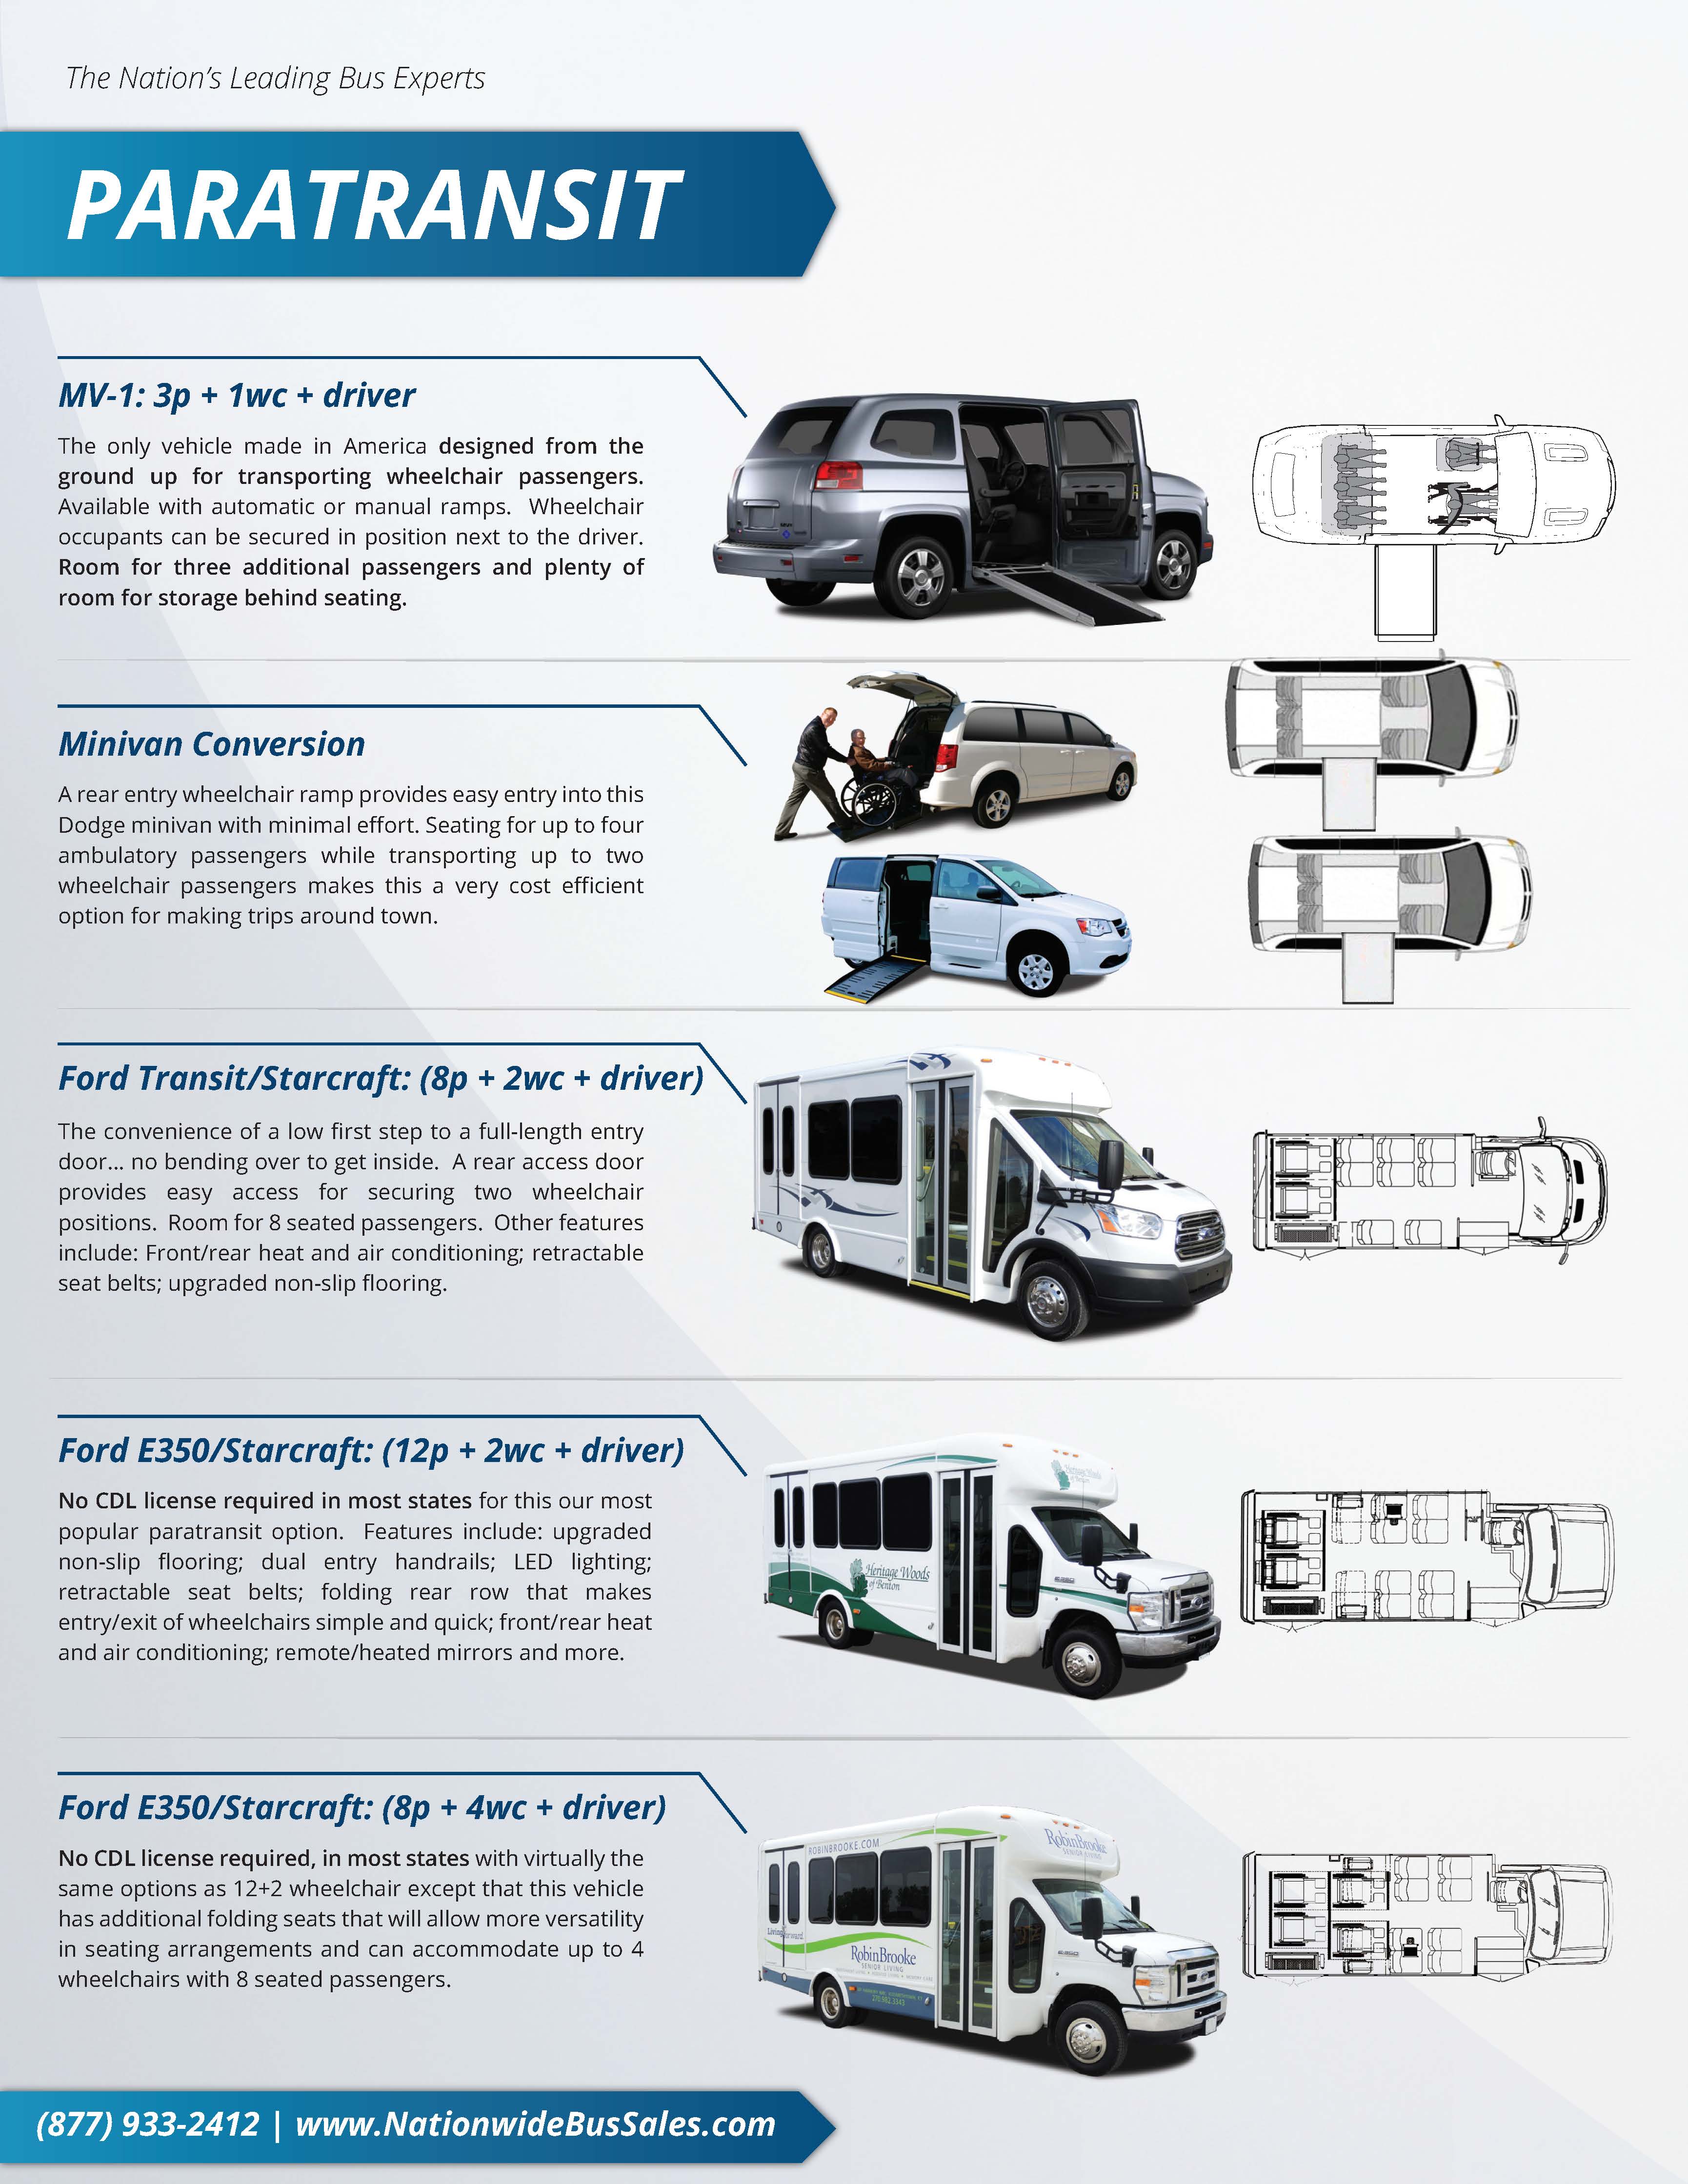 Multi-Vehicle-Brochure-UNIVERSAL-TODDW.-nw_Page_2